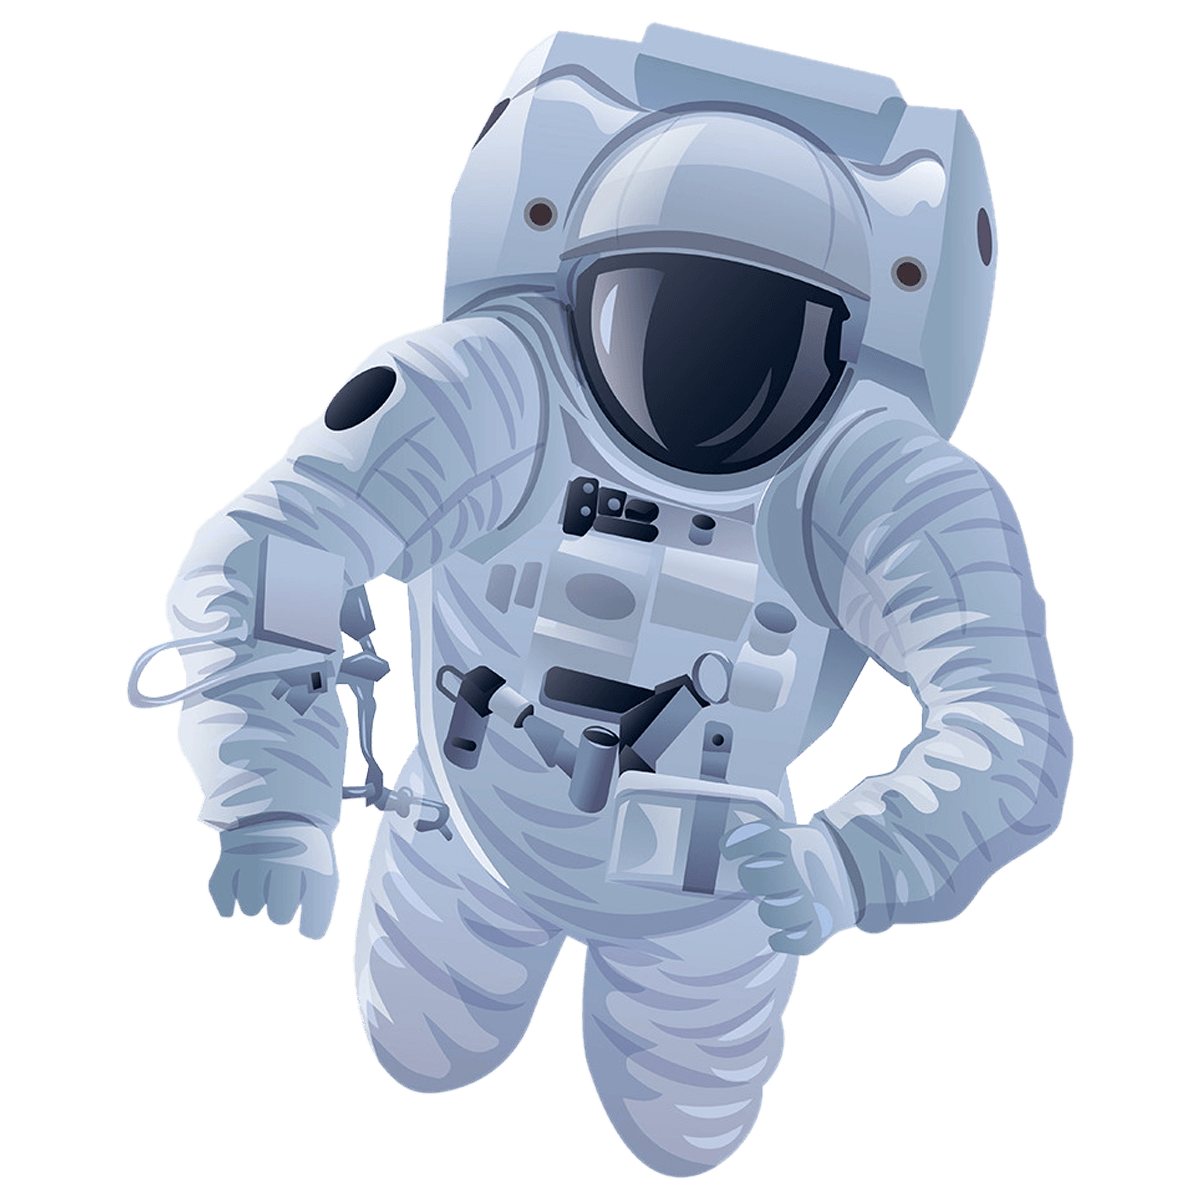 astronaut png, astronaut png cartoon, astronaut png clipart, astronaut png transparent, astronaut png hd, astronaut png 4k, astronaut png free, astronaut png vector, astronaut png icon, cute astronaut png, animated astronaut png, falling astronaut png, floating astronaut png, space astronaut png, minecraft astronaut png, astronaut helmet png, astronaut cartoon png, astronaut clipart png, astronaut suit png, astronauts png, astronaut vector png, astronaut silhouette png, astronaut illustration png, astronaut icon png, astronaut logo png, astronaut png cartoon, astronaut png clipart, astronaut png vector, cute astronaut png, astronaut png transparent, space png,